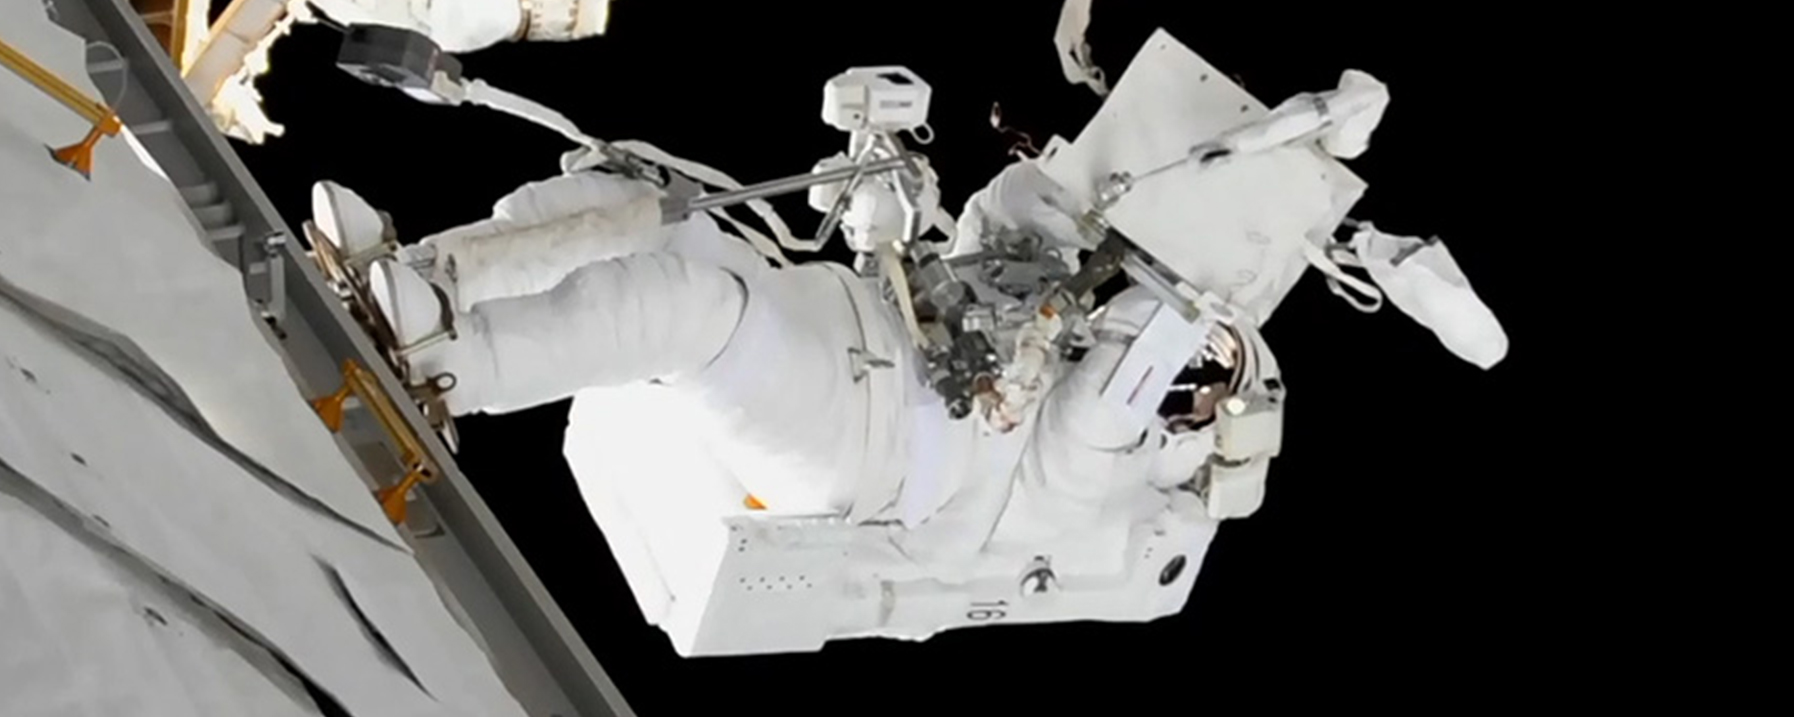 Astronaut Doing a Spacewalk Outside the ISS